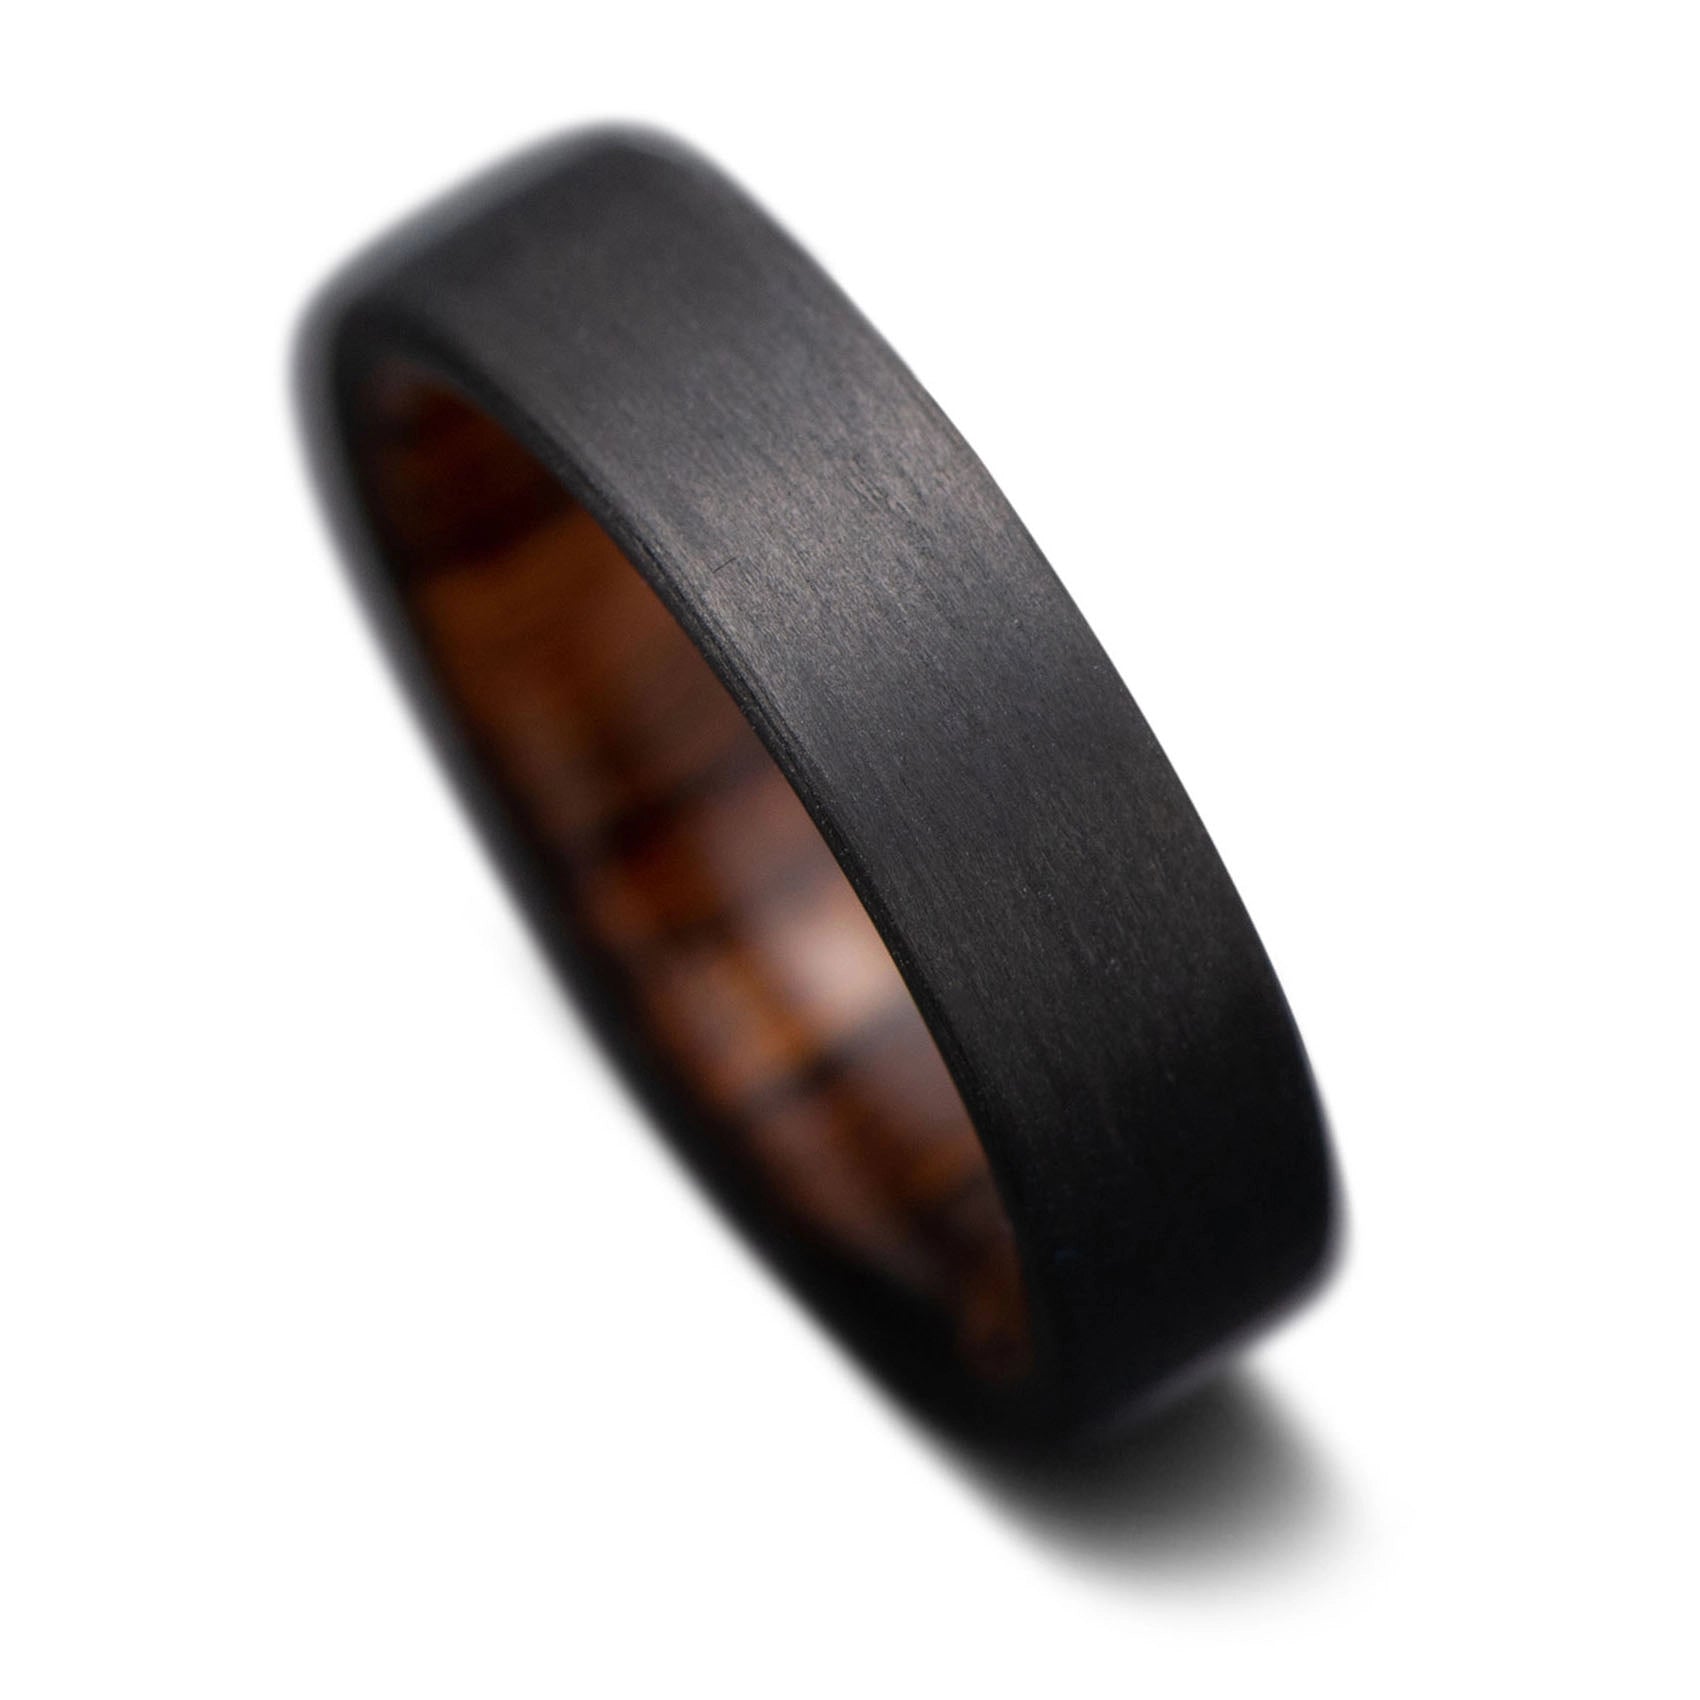  CarbonUni Core Ring with Zebrano inner sleeve, 5mm - THE QUANTUM